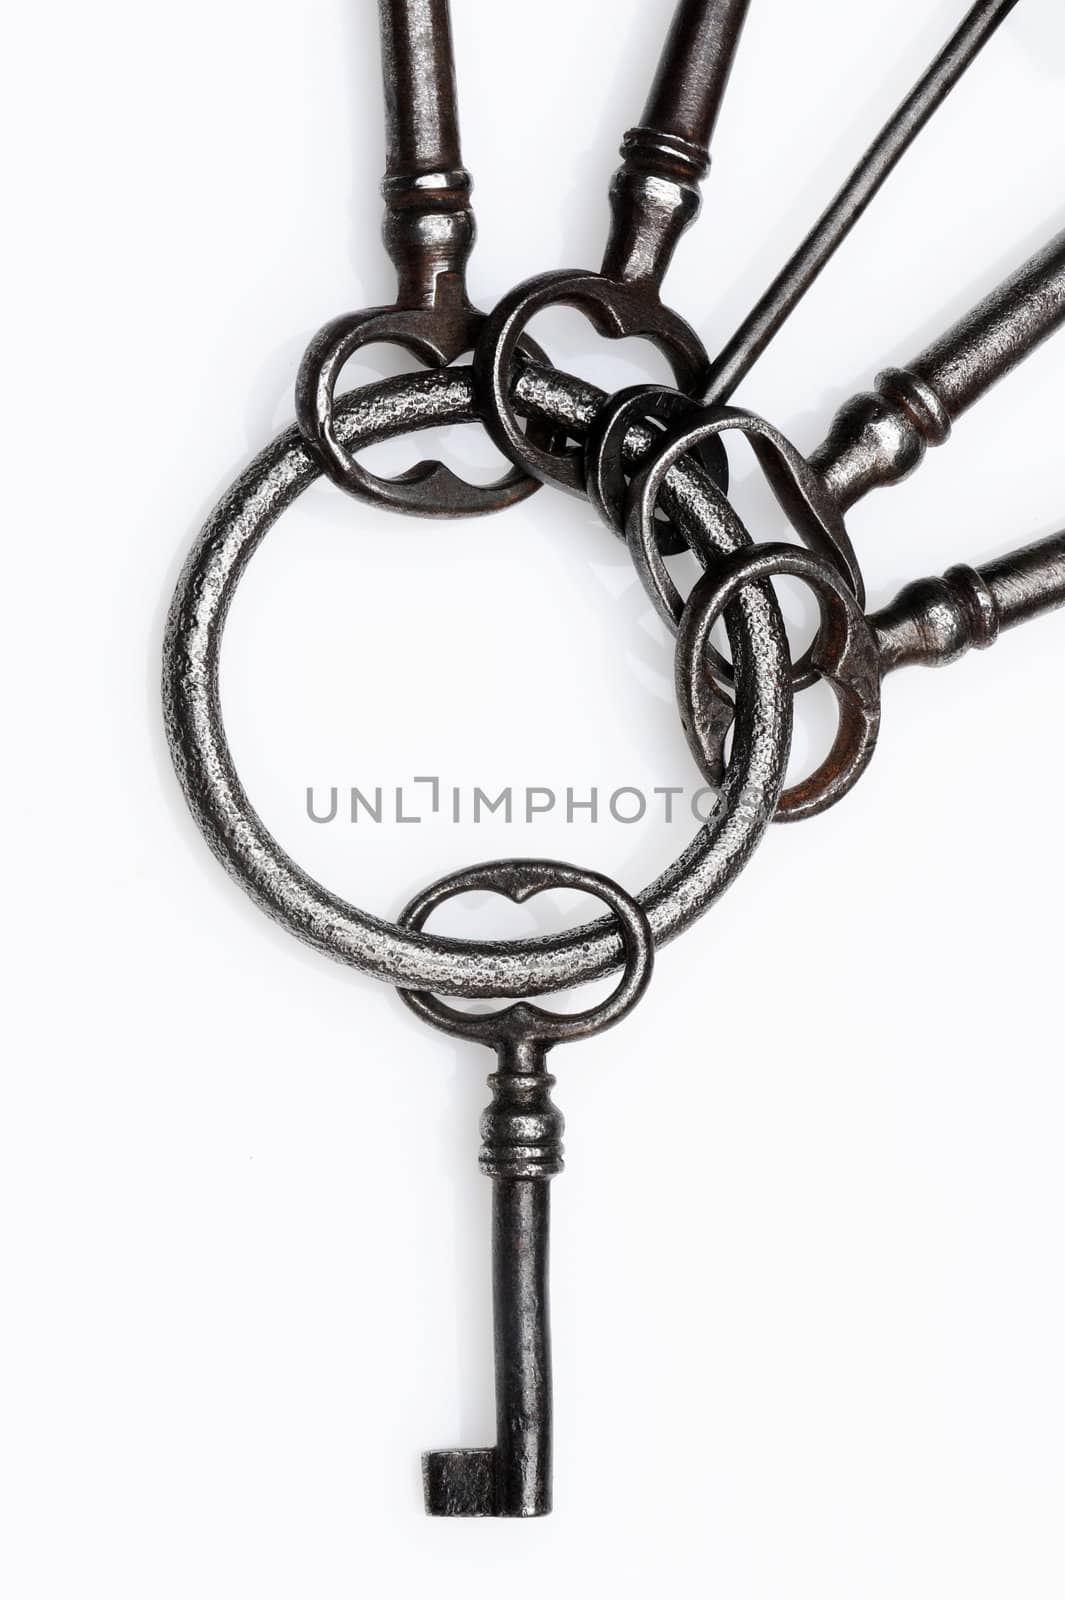 old keys on white background, close-up by stokkete